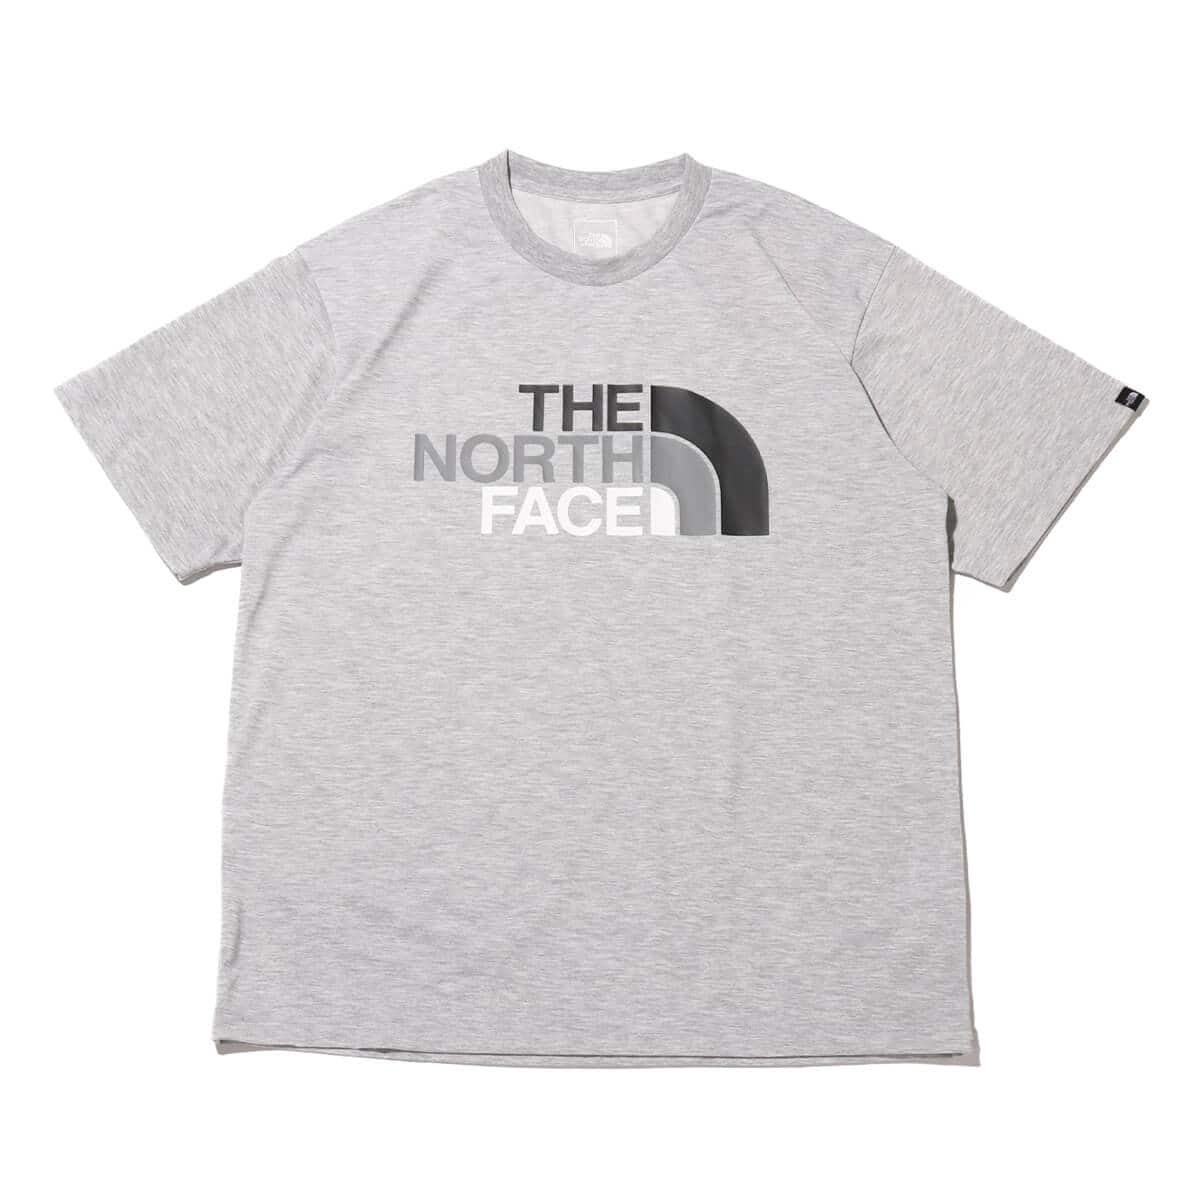 THE NORTH FACE S/S Colorful Logo Tee ミックスグレー